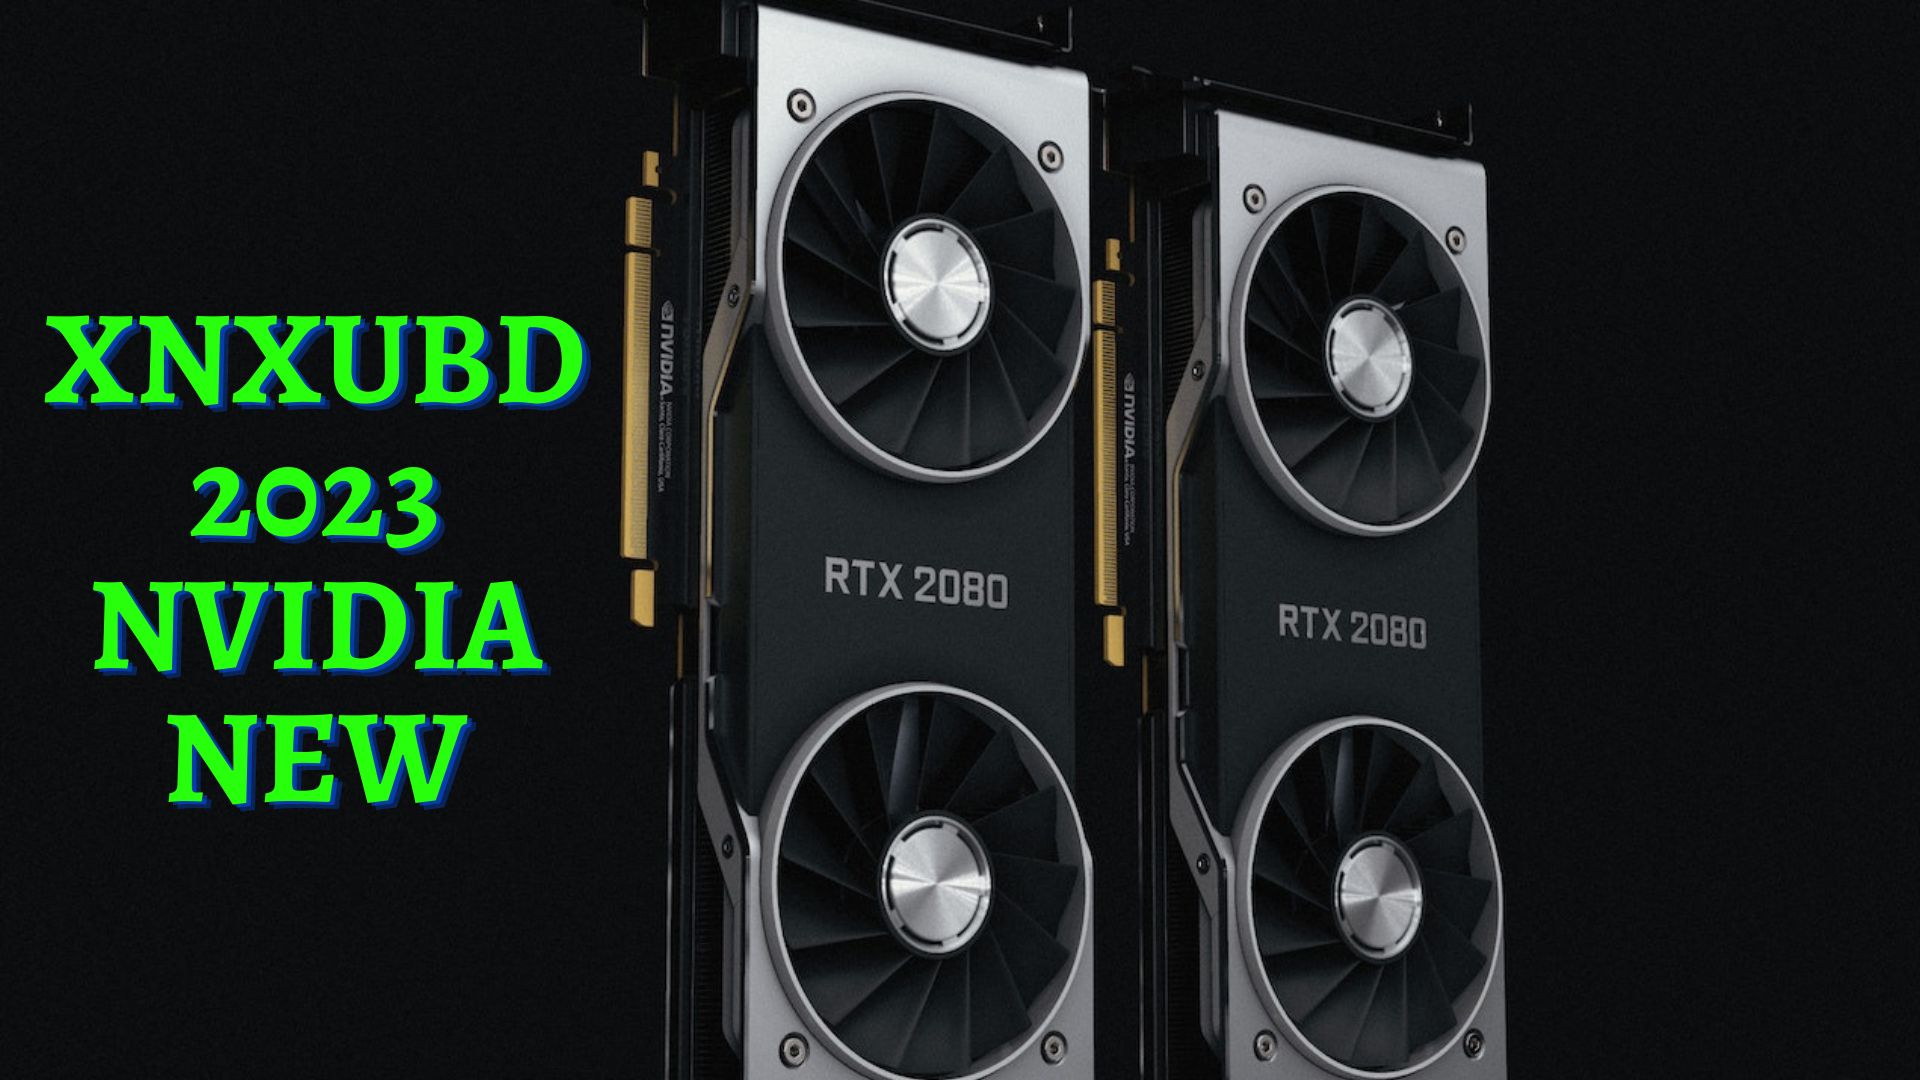 Xnxubd 2023 Nvidia New - Breakthrough In Graphics Technology